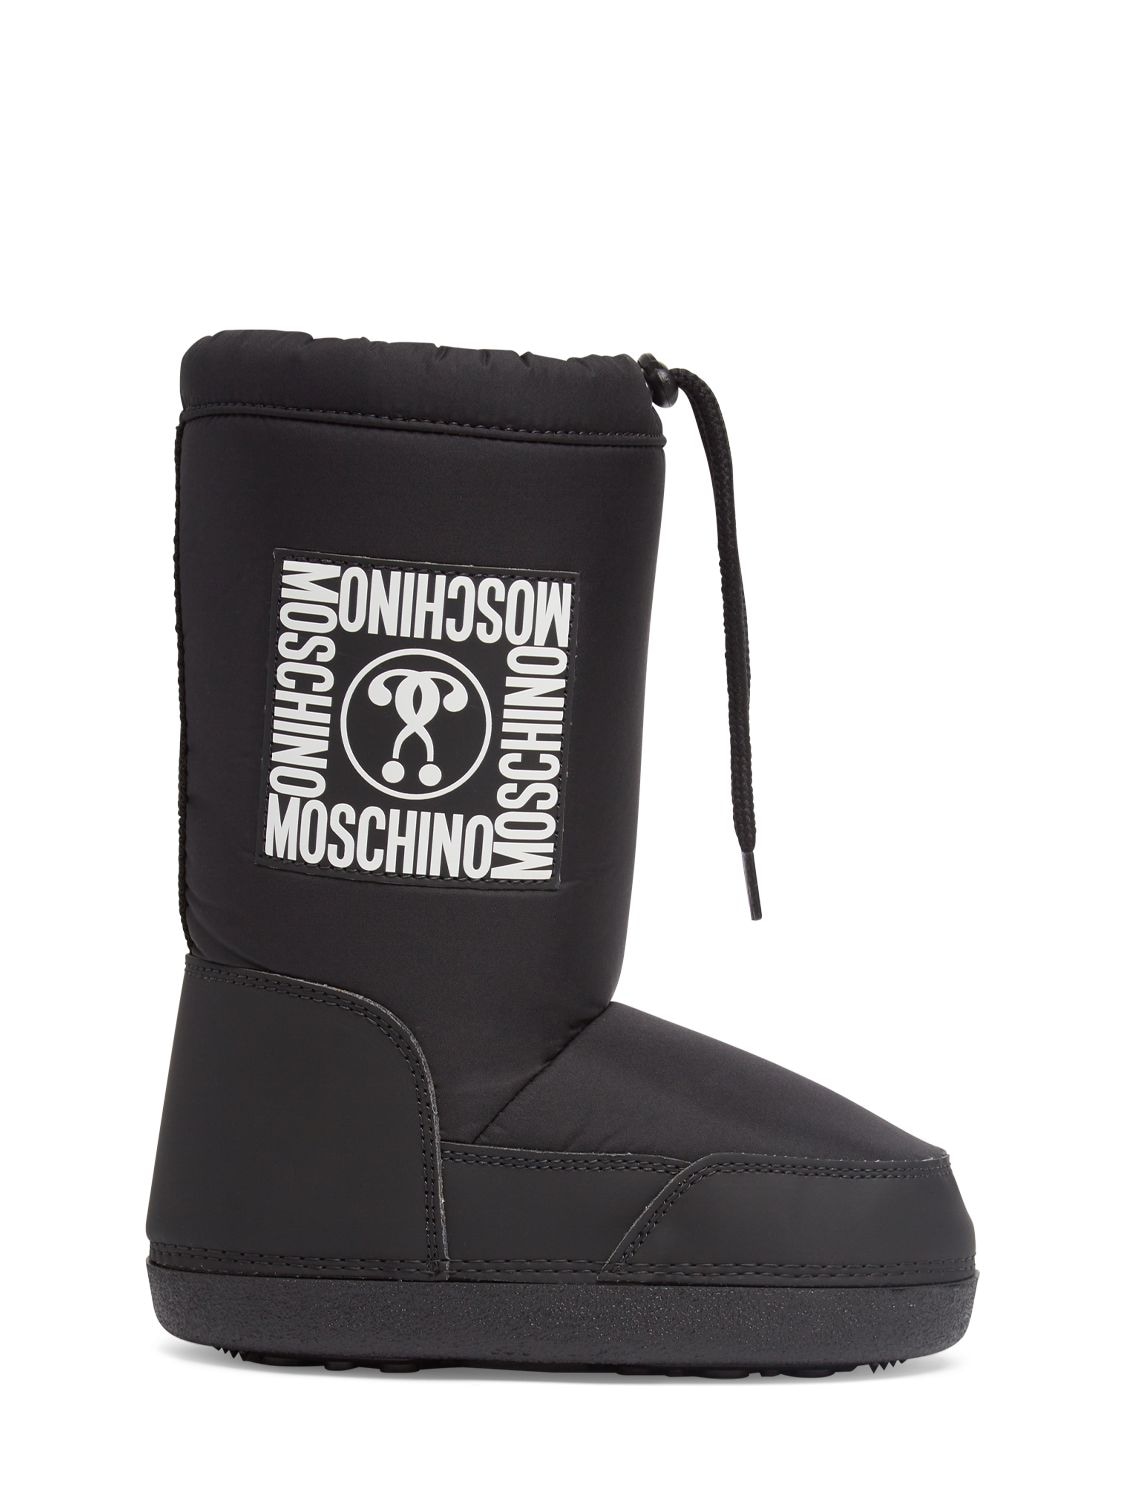 Snow Boots W/logo – KIDS-GIRLS > SHOES > BOOTS